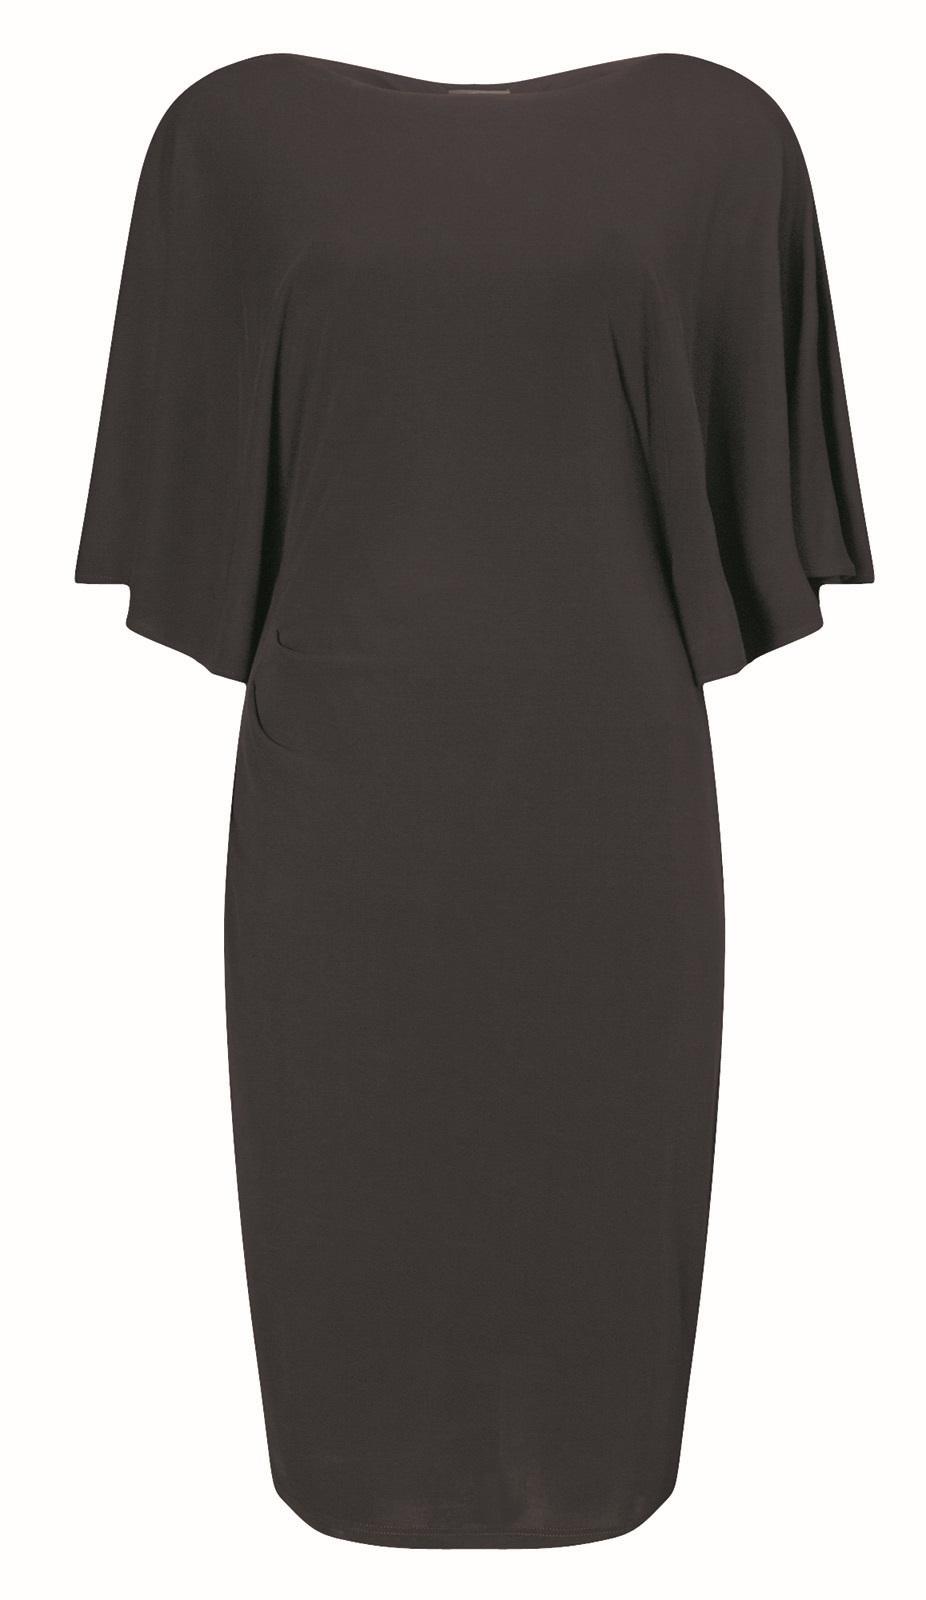 Phase Eight, Caley Cape Dress, £89